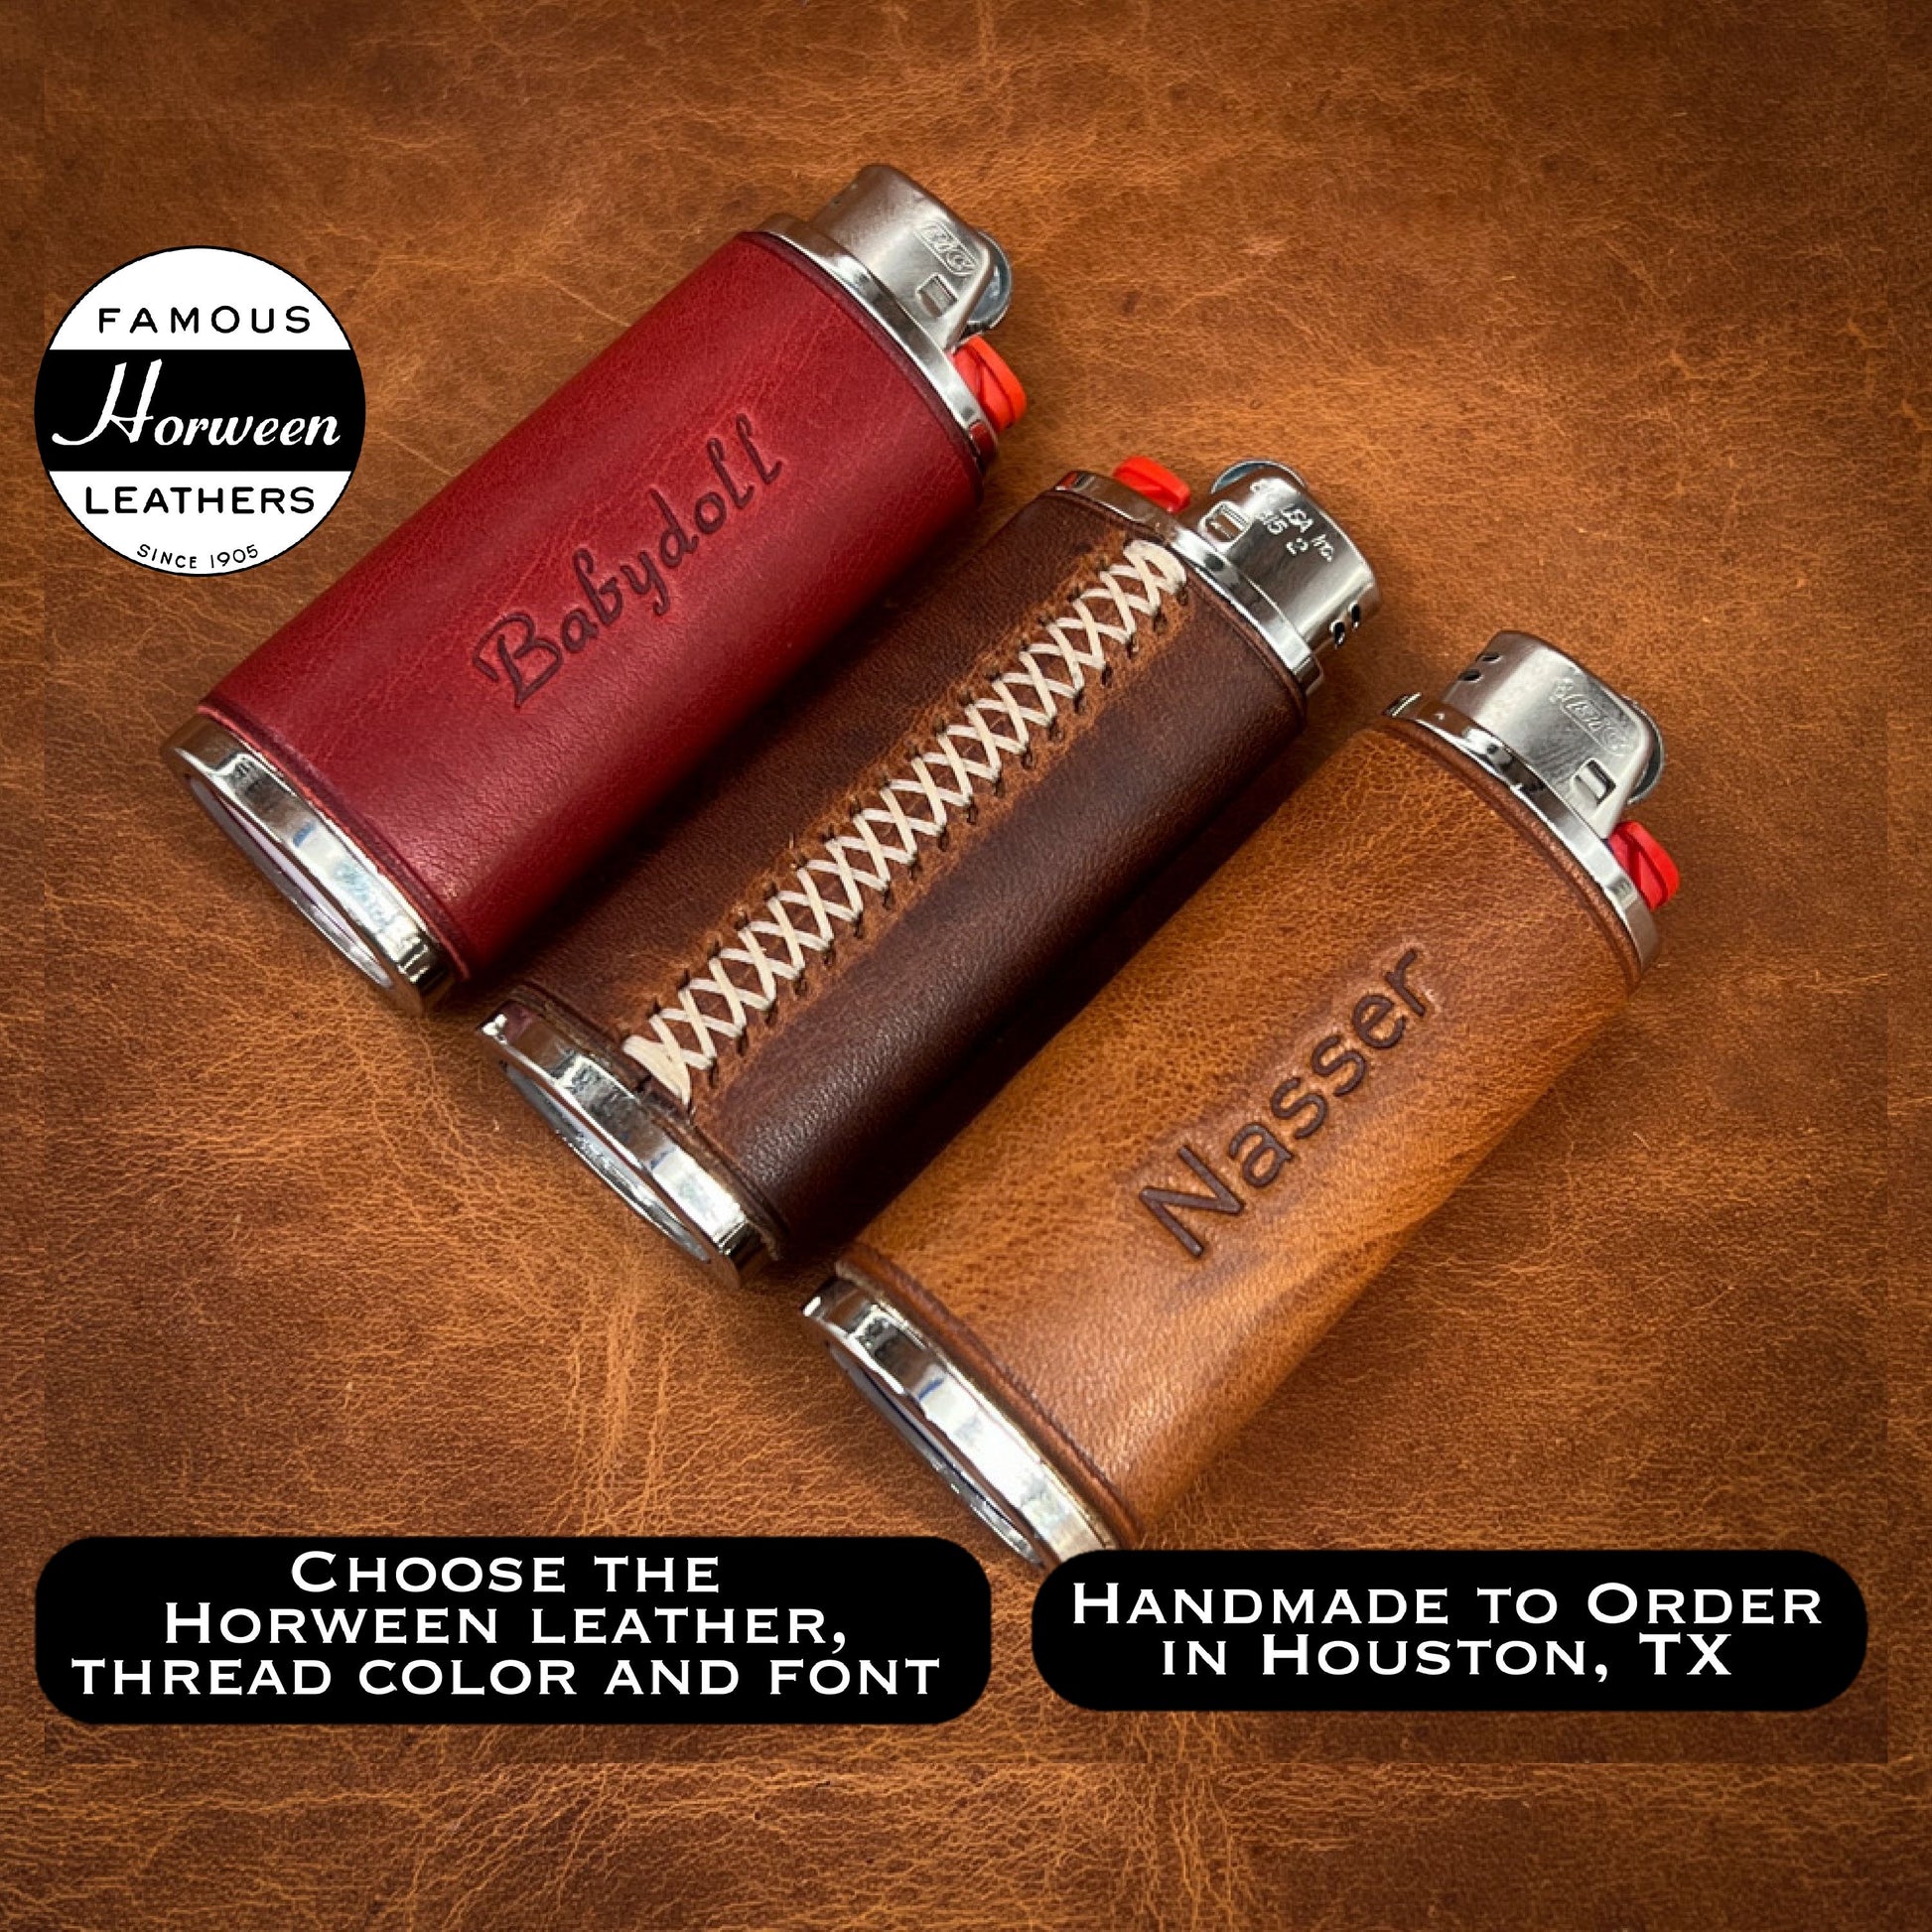 Custom Leather Bic Lighter Cases in Red, Brown and English Tan Horween Leather.  Handmade to Order in Houston Texas.